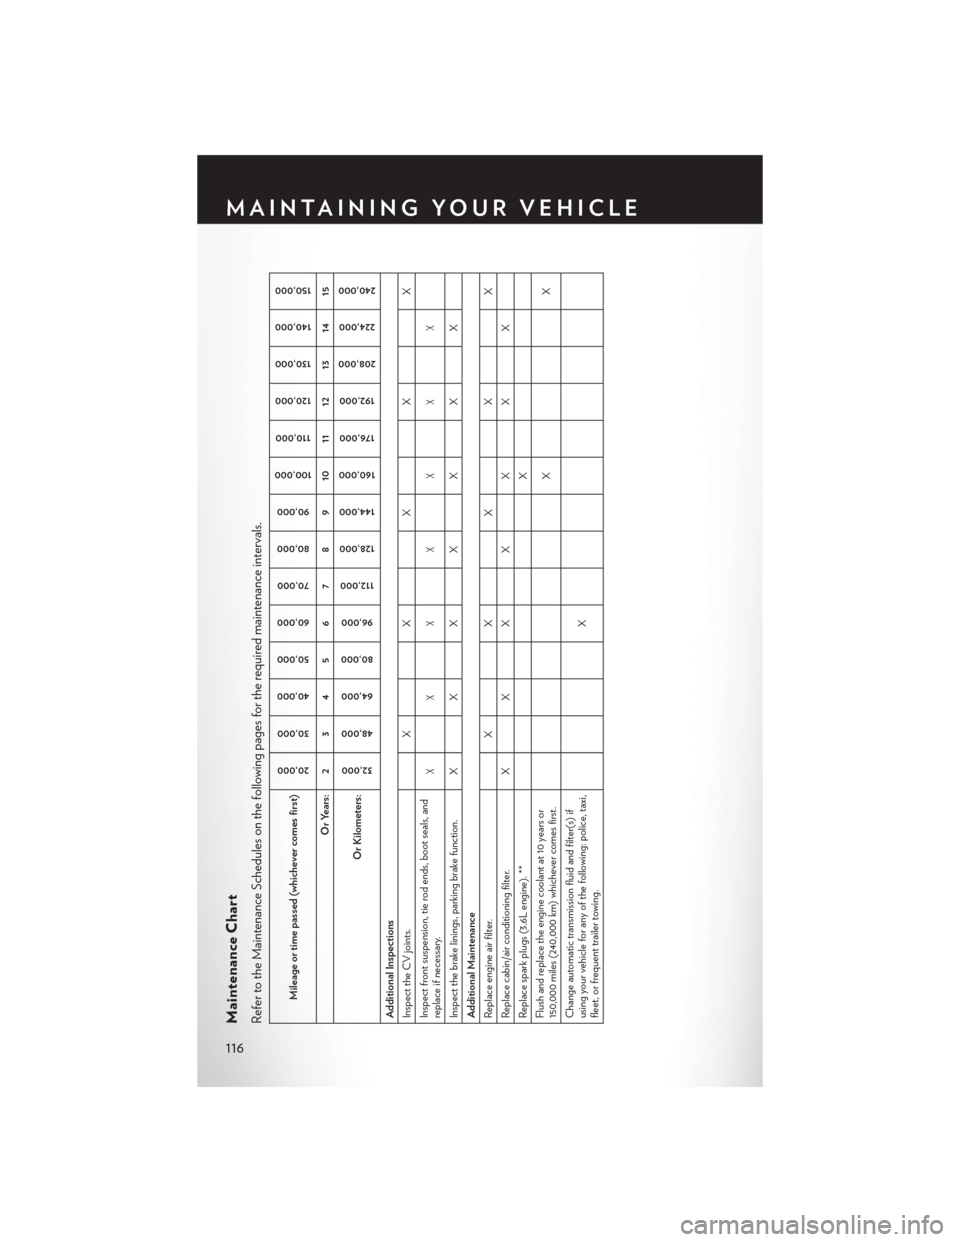 CHRYSLER TOWN AND COUNTRY 2013 5.G User Guide Maintenance ChartRefer to the Maintenance Schedules on the following pages for the required maintenance intervals.
Mileage or time passed (whichever comes first)
20,00030,000
40,000 50,000
60,000 70,0